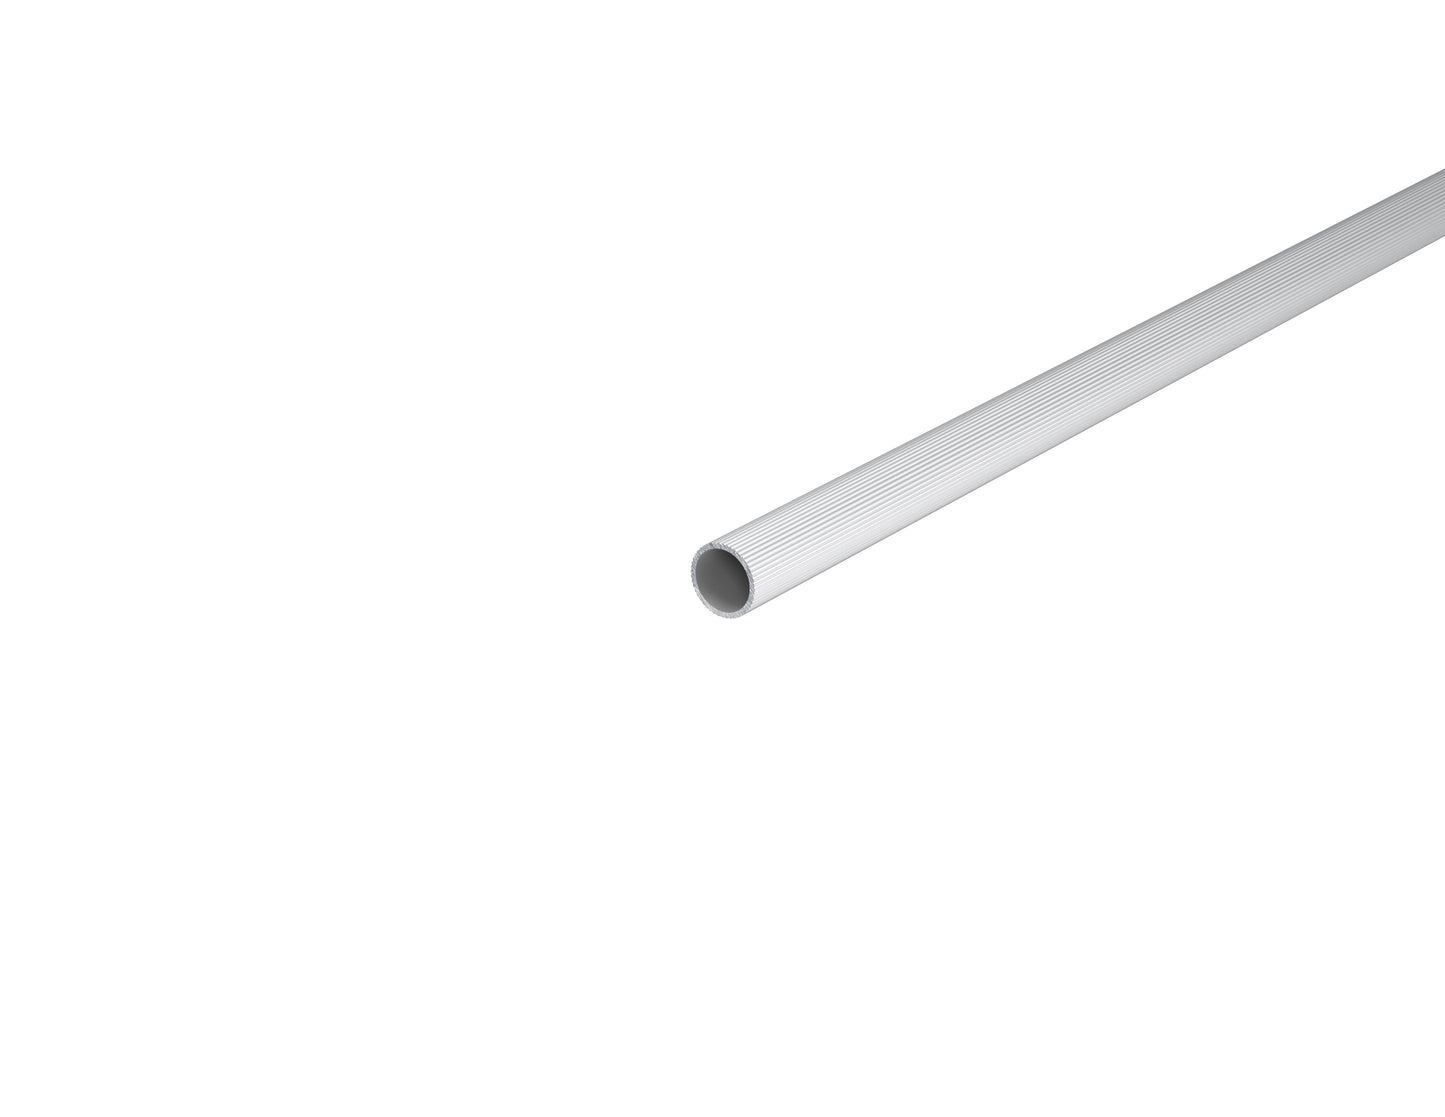 5/8" OD Fluted aluminum tube .038" wall mill finish serated exterior round extruded tube 0.625" diameter